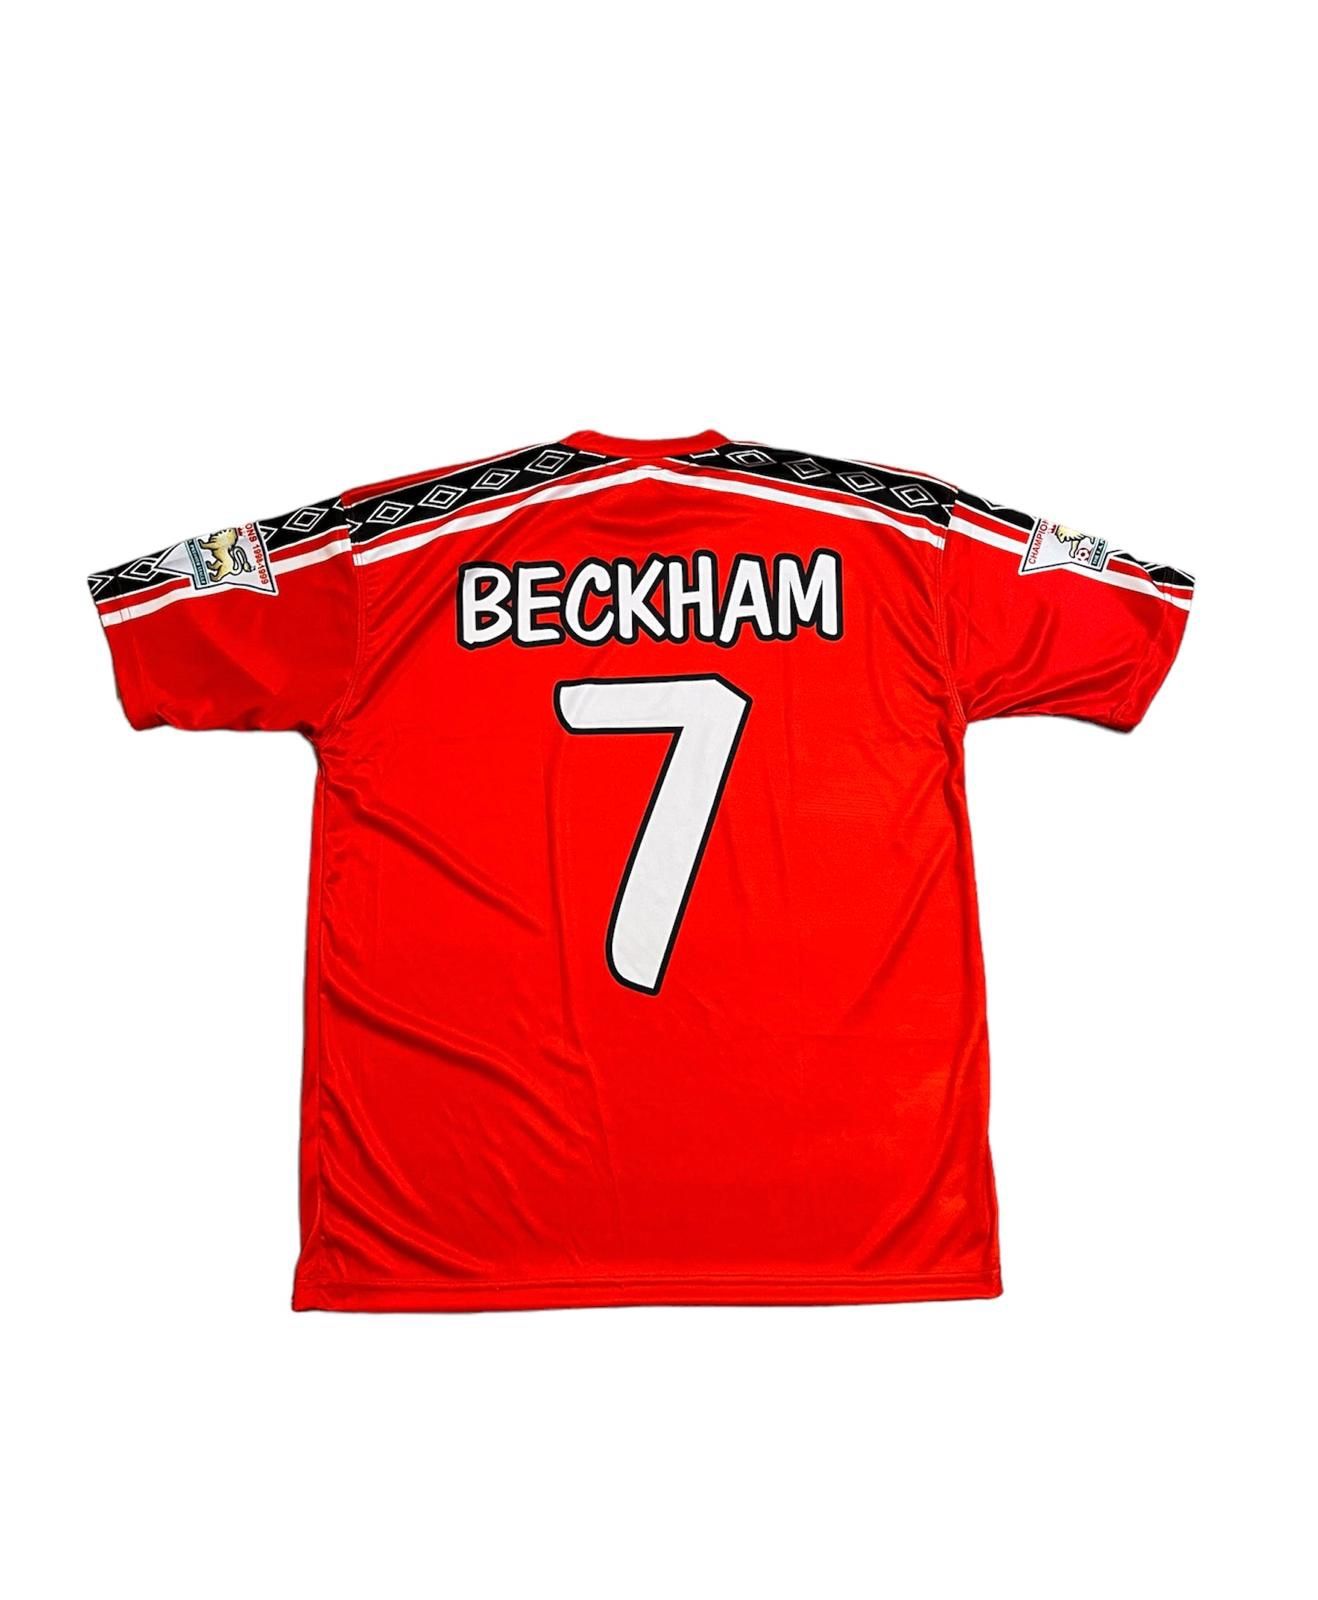 Manchester United 1998/1999 Retro Jersey, Beckham, Giggs with patches